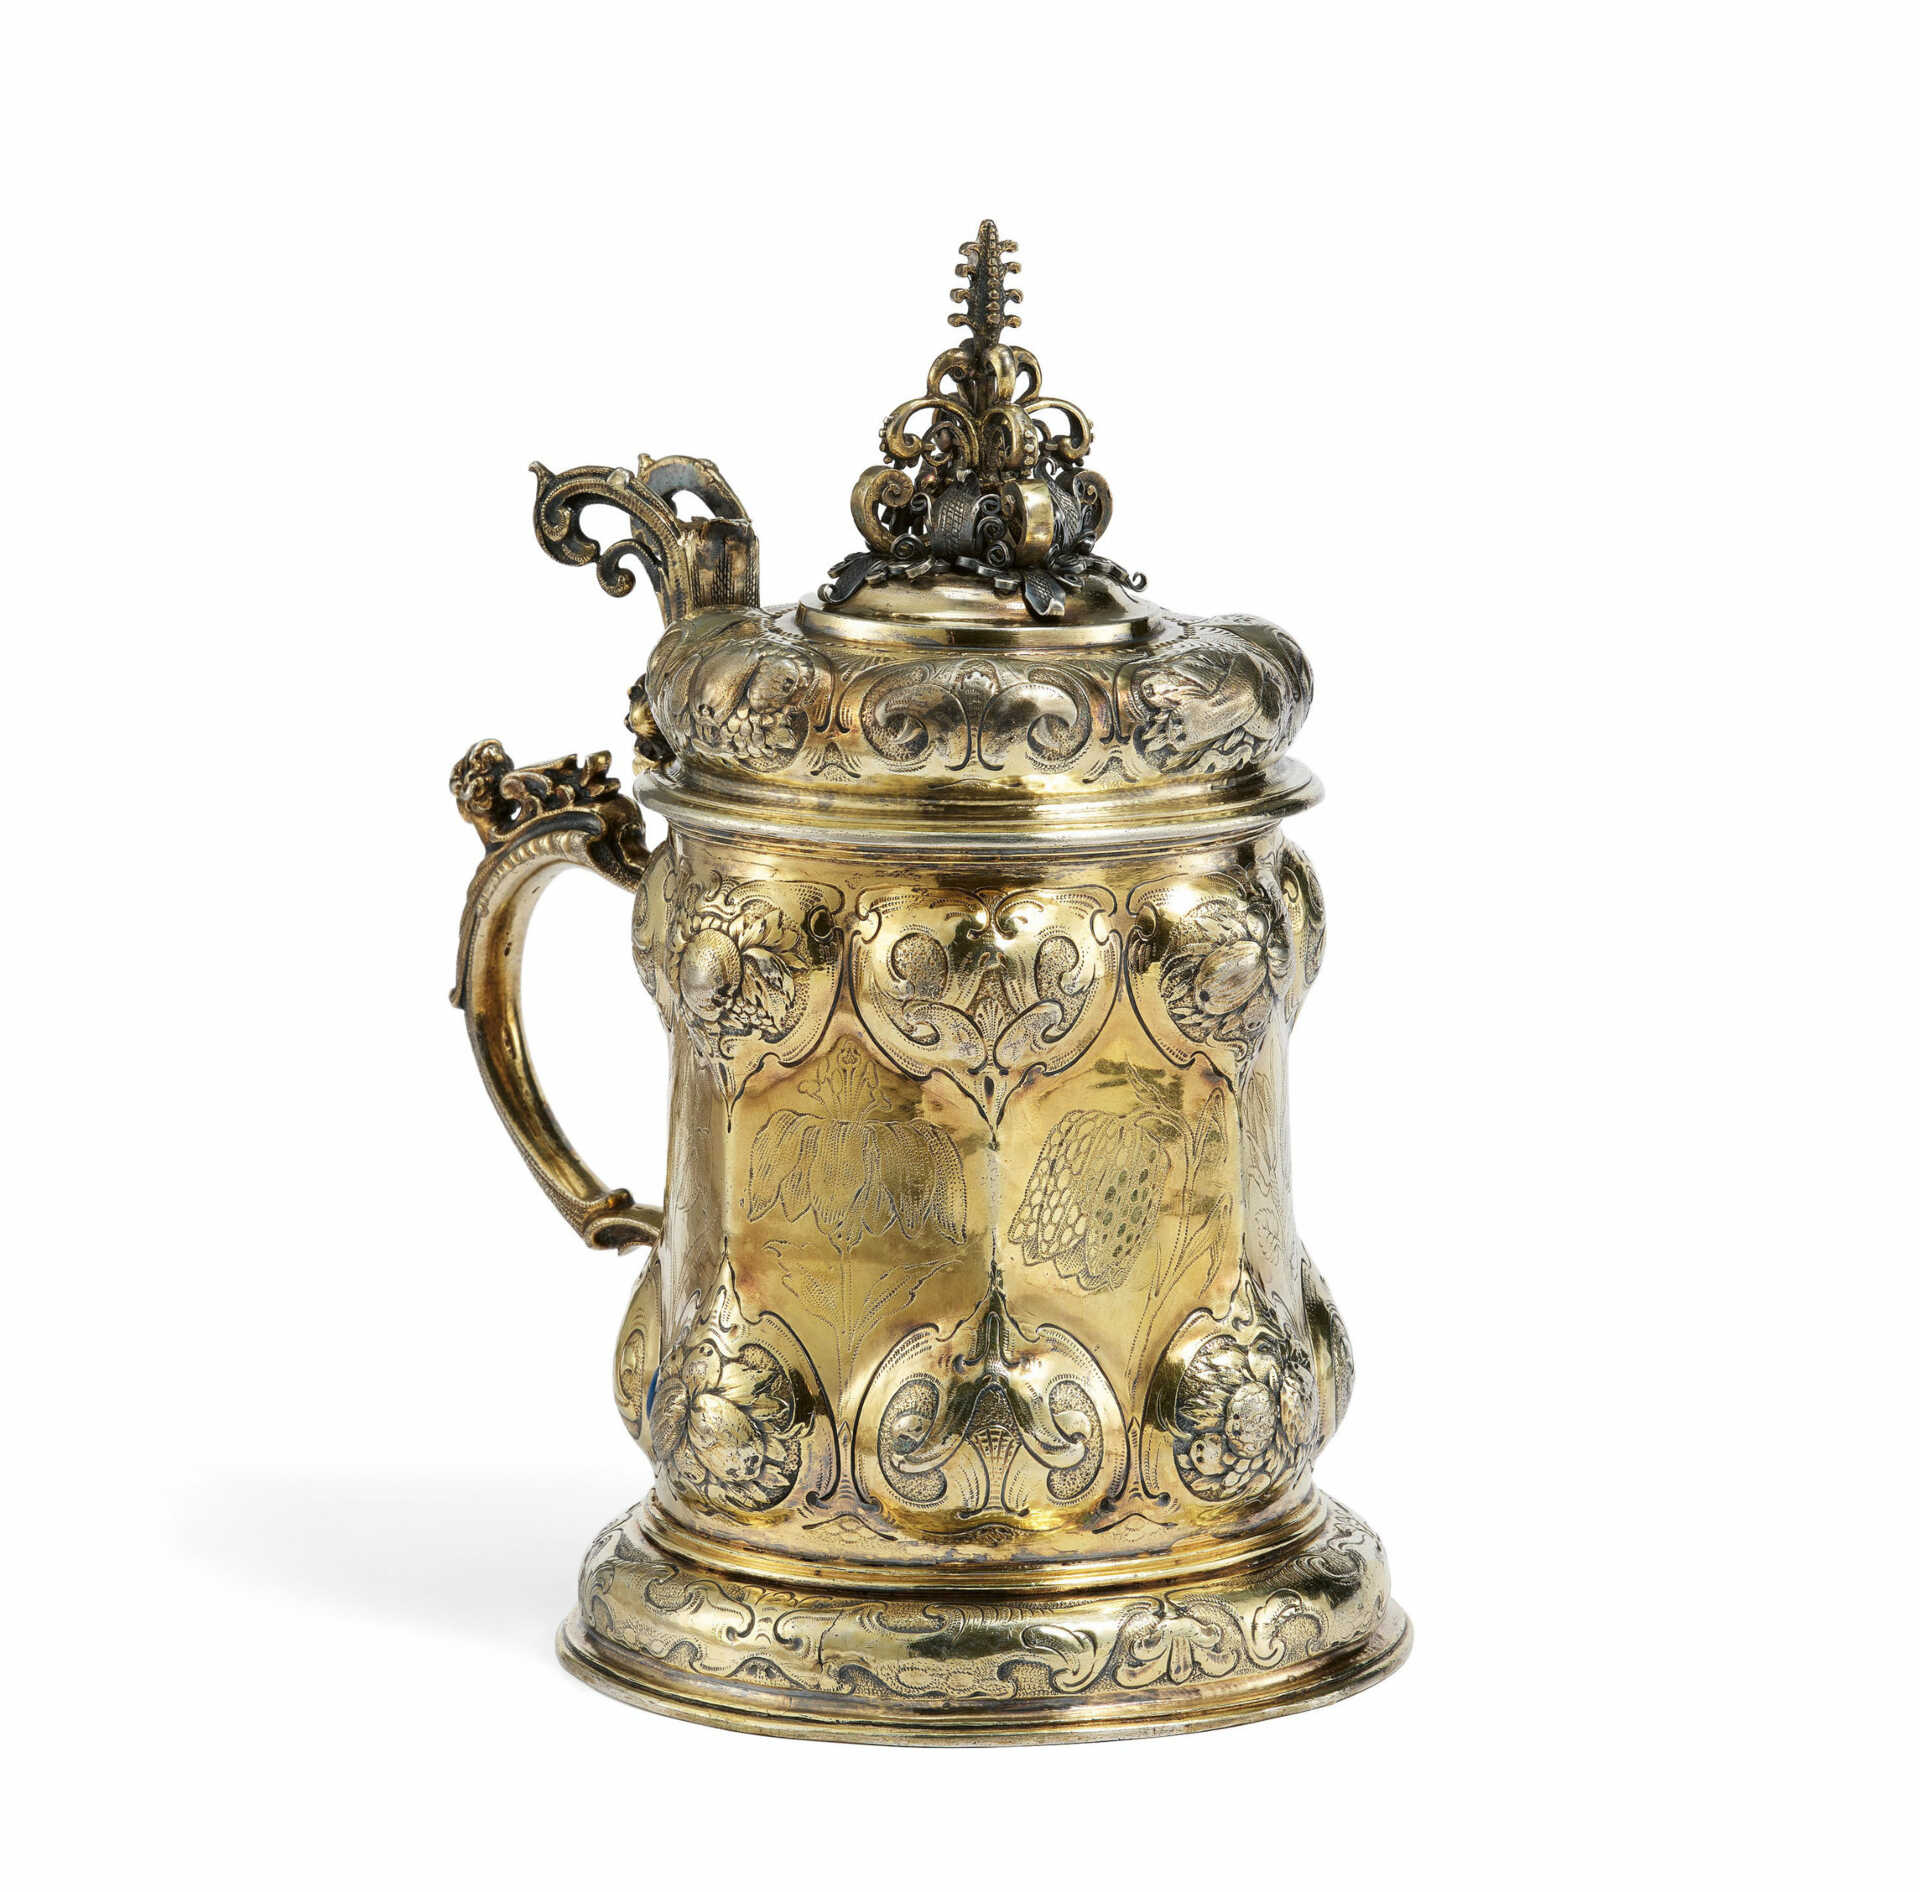 Magnificent, Lidded Vermeil Tankard with Fine Floral Engravings